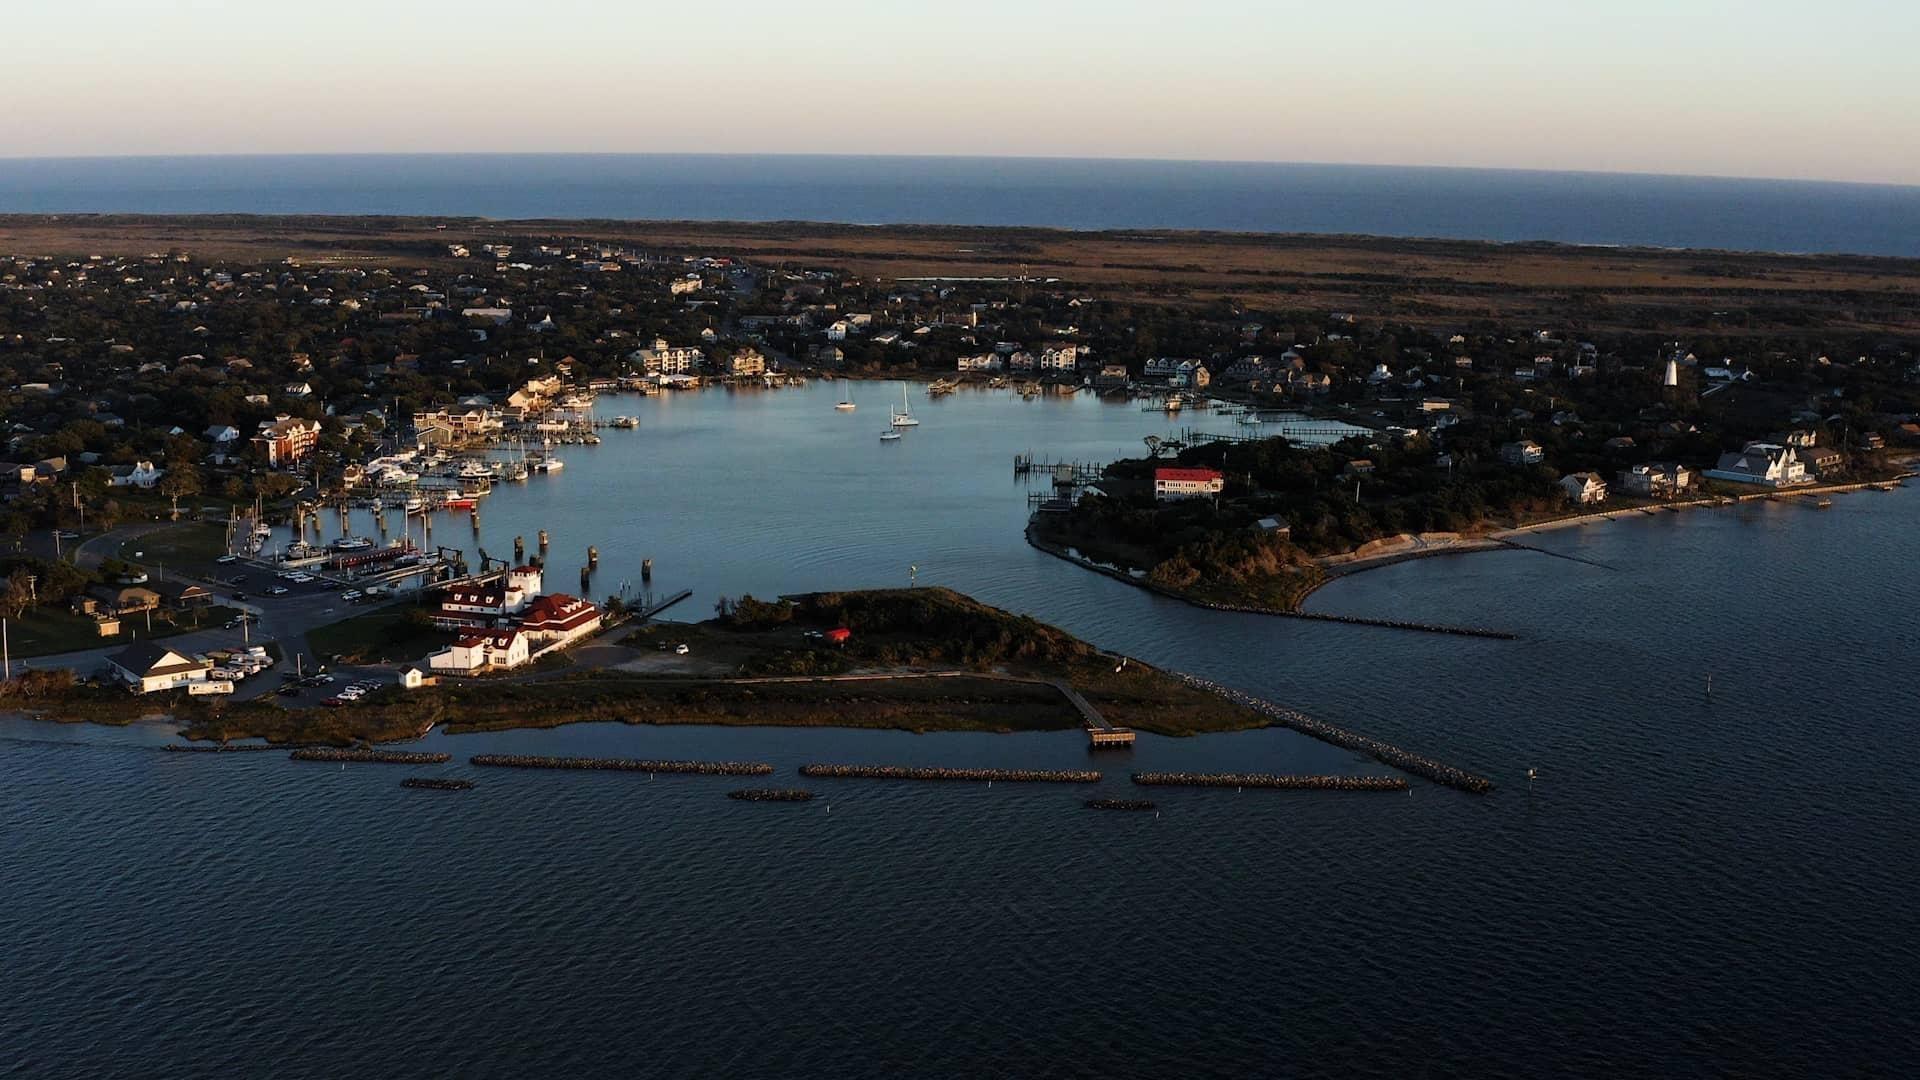 aerial shot of ocracoke coast at early night late evening